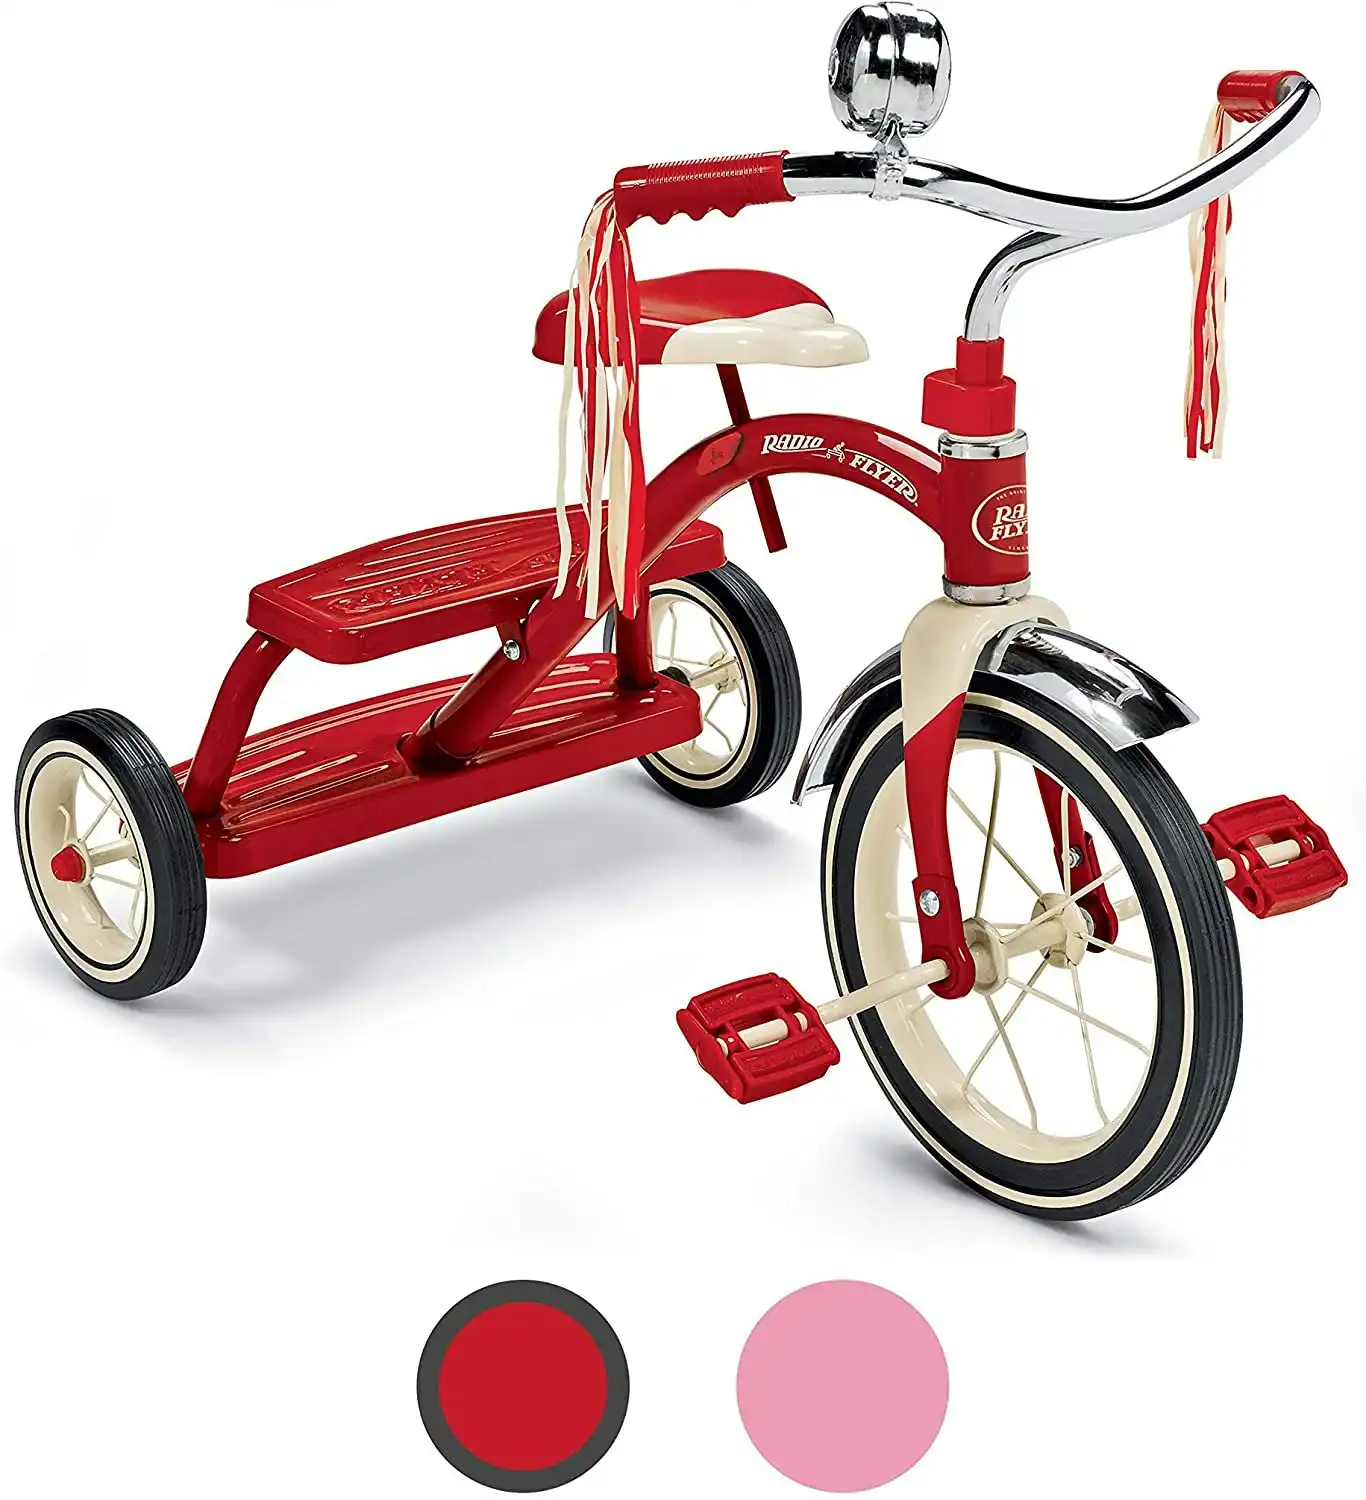 Radio Flyer - Classic Red Dual Deck Tricycle